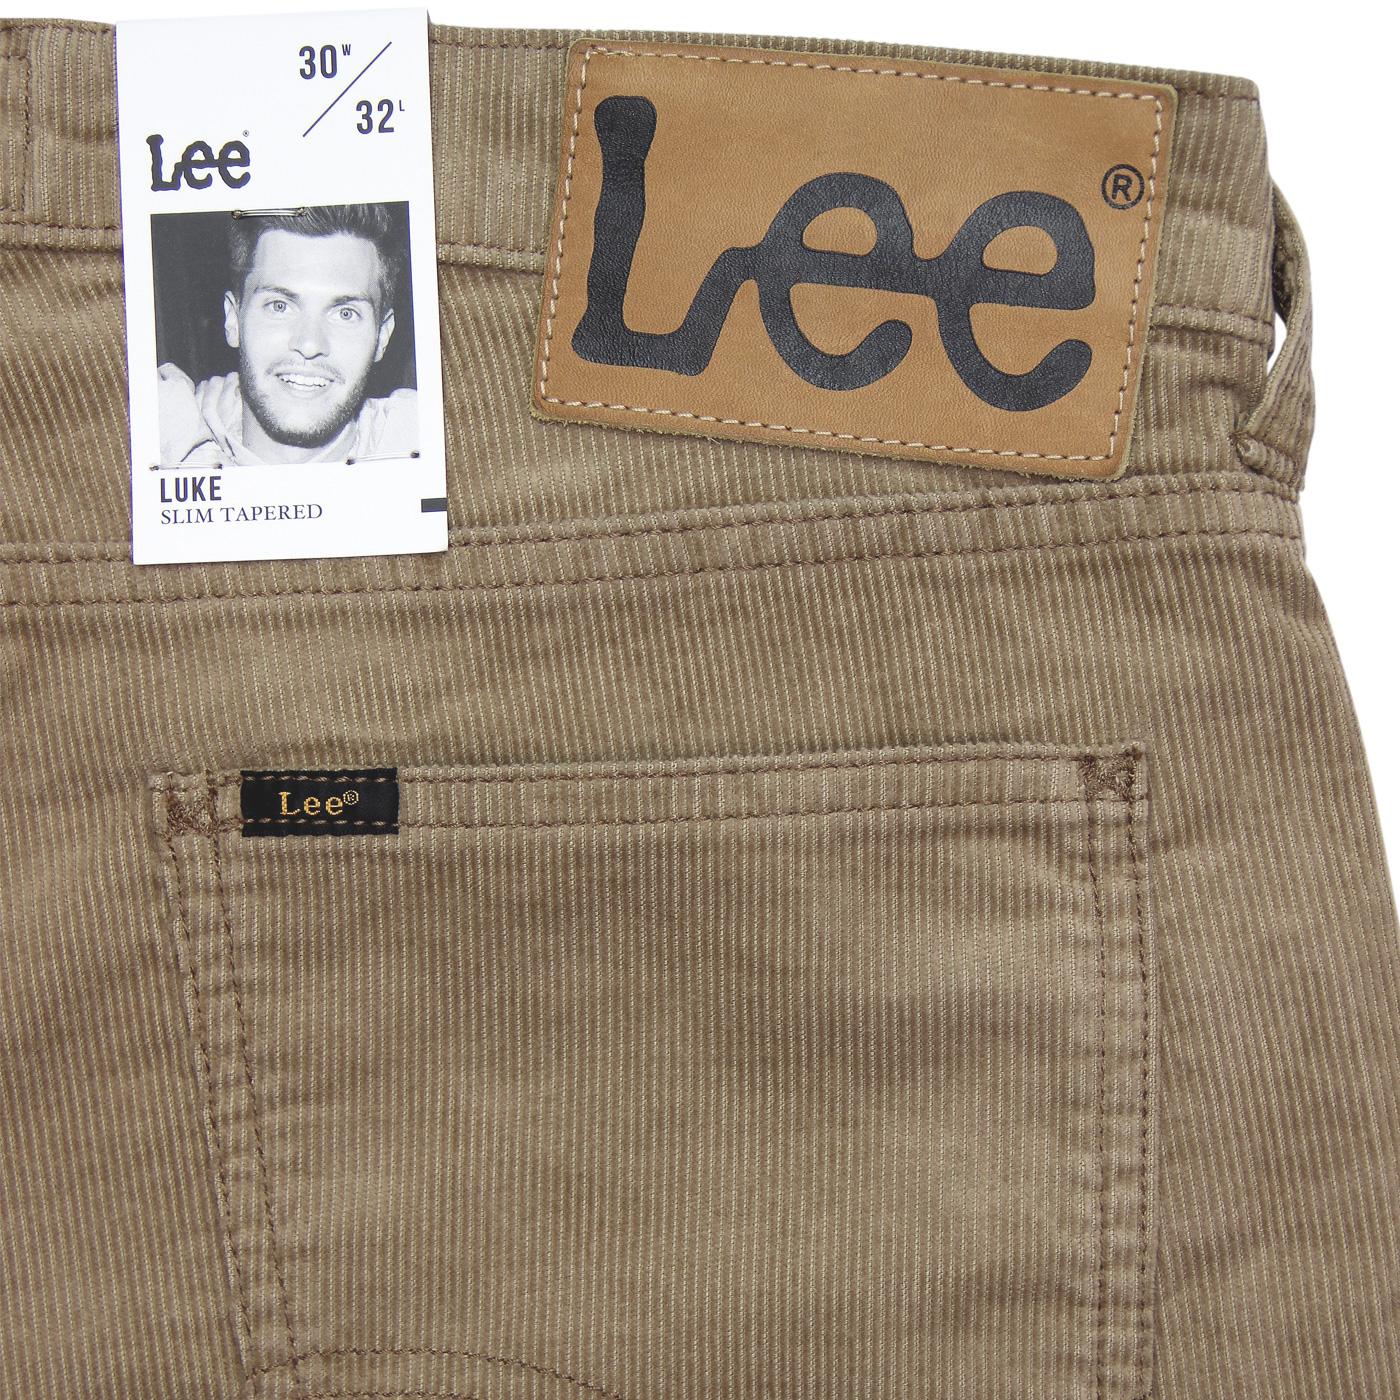 lee cords jeans